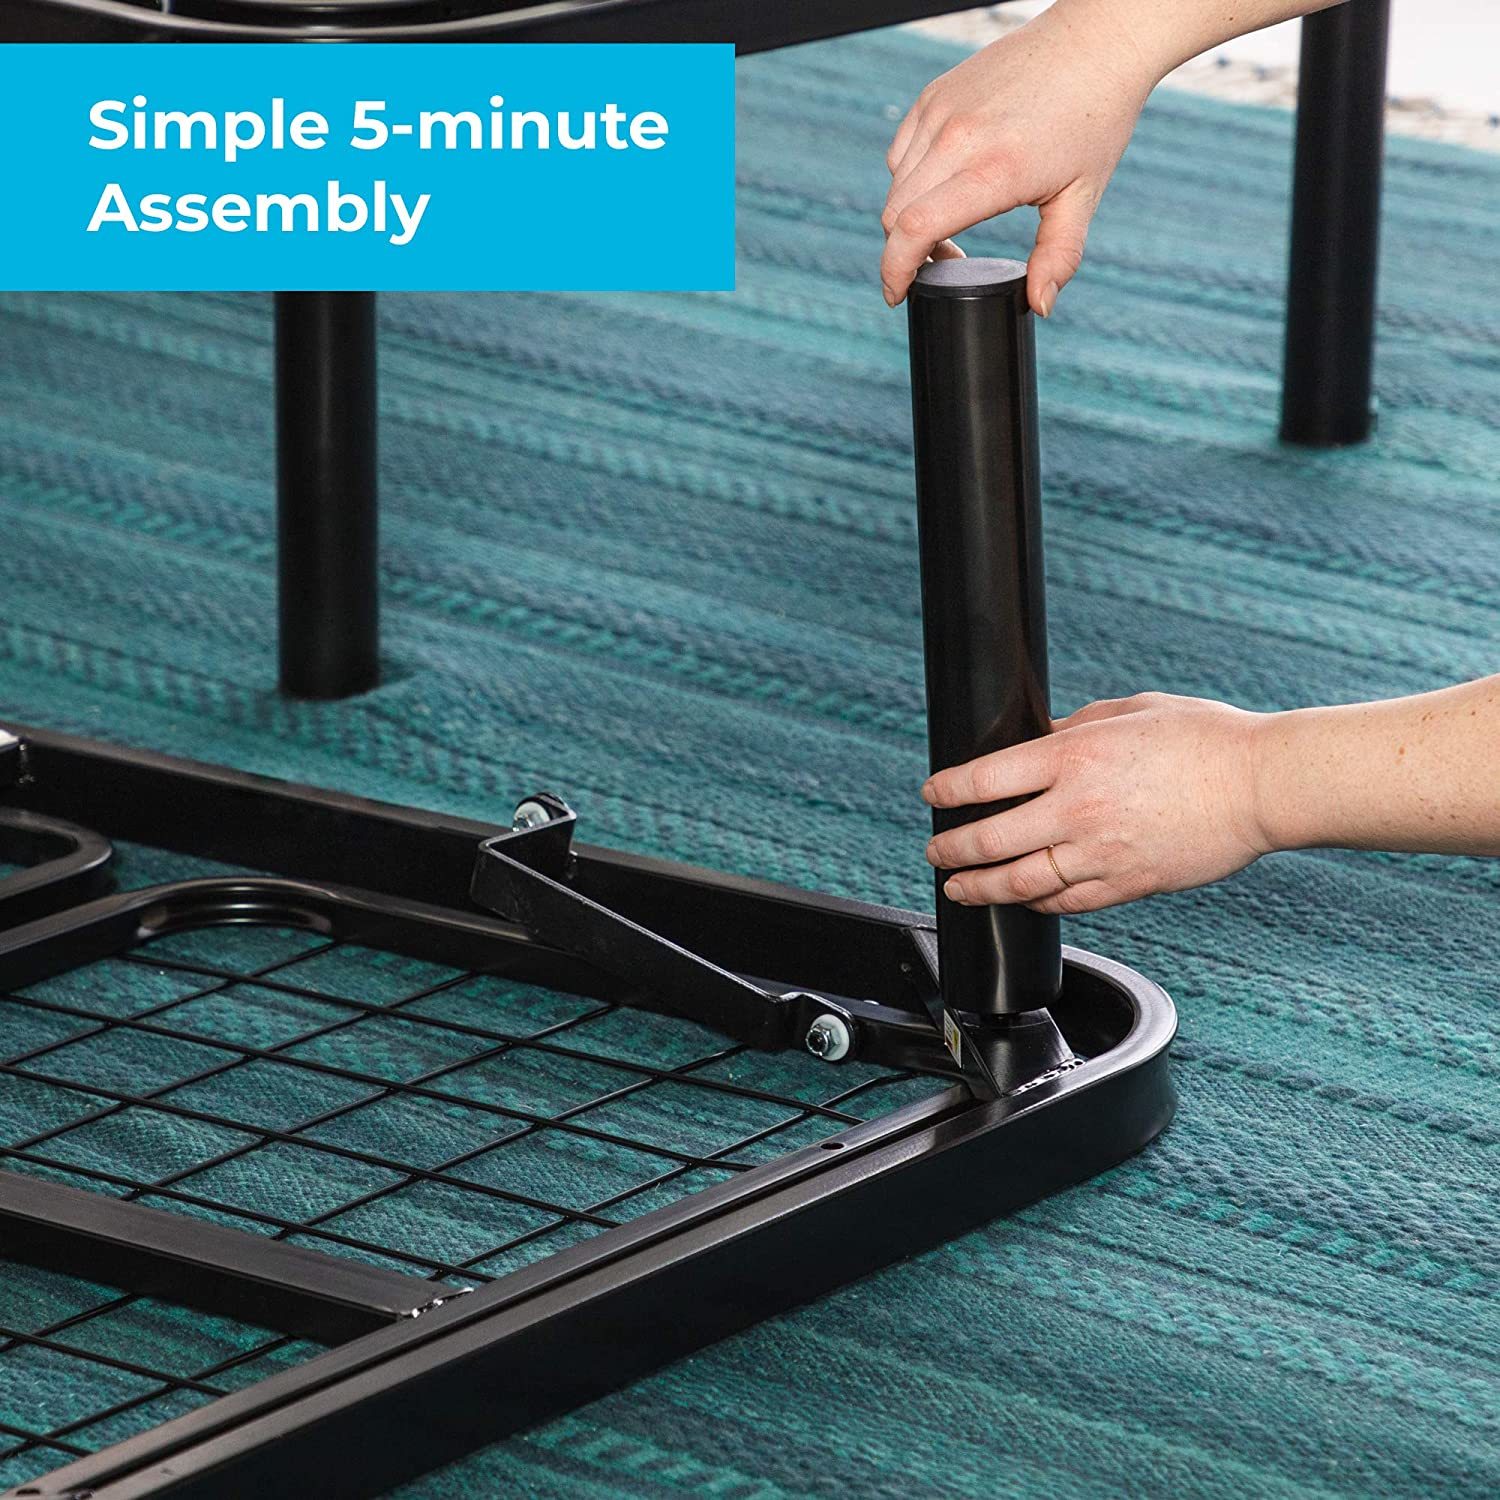 Linenspa Adjustable Bed Reviews - Assembly